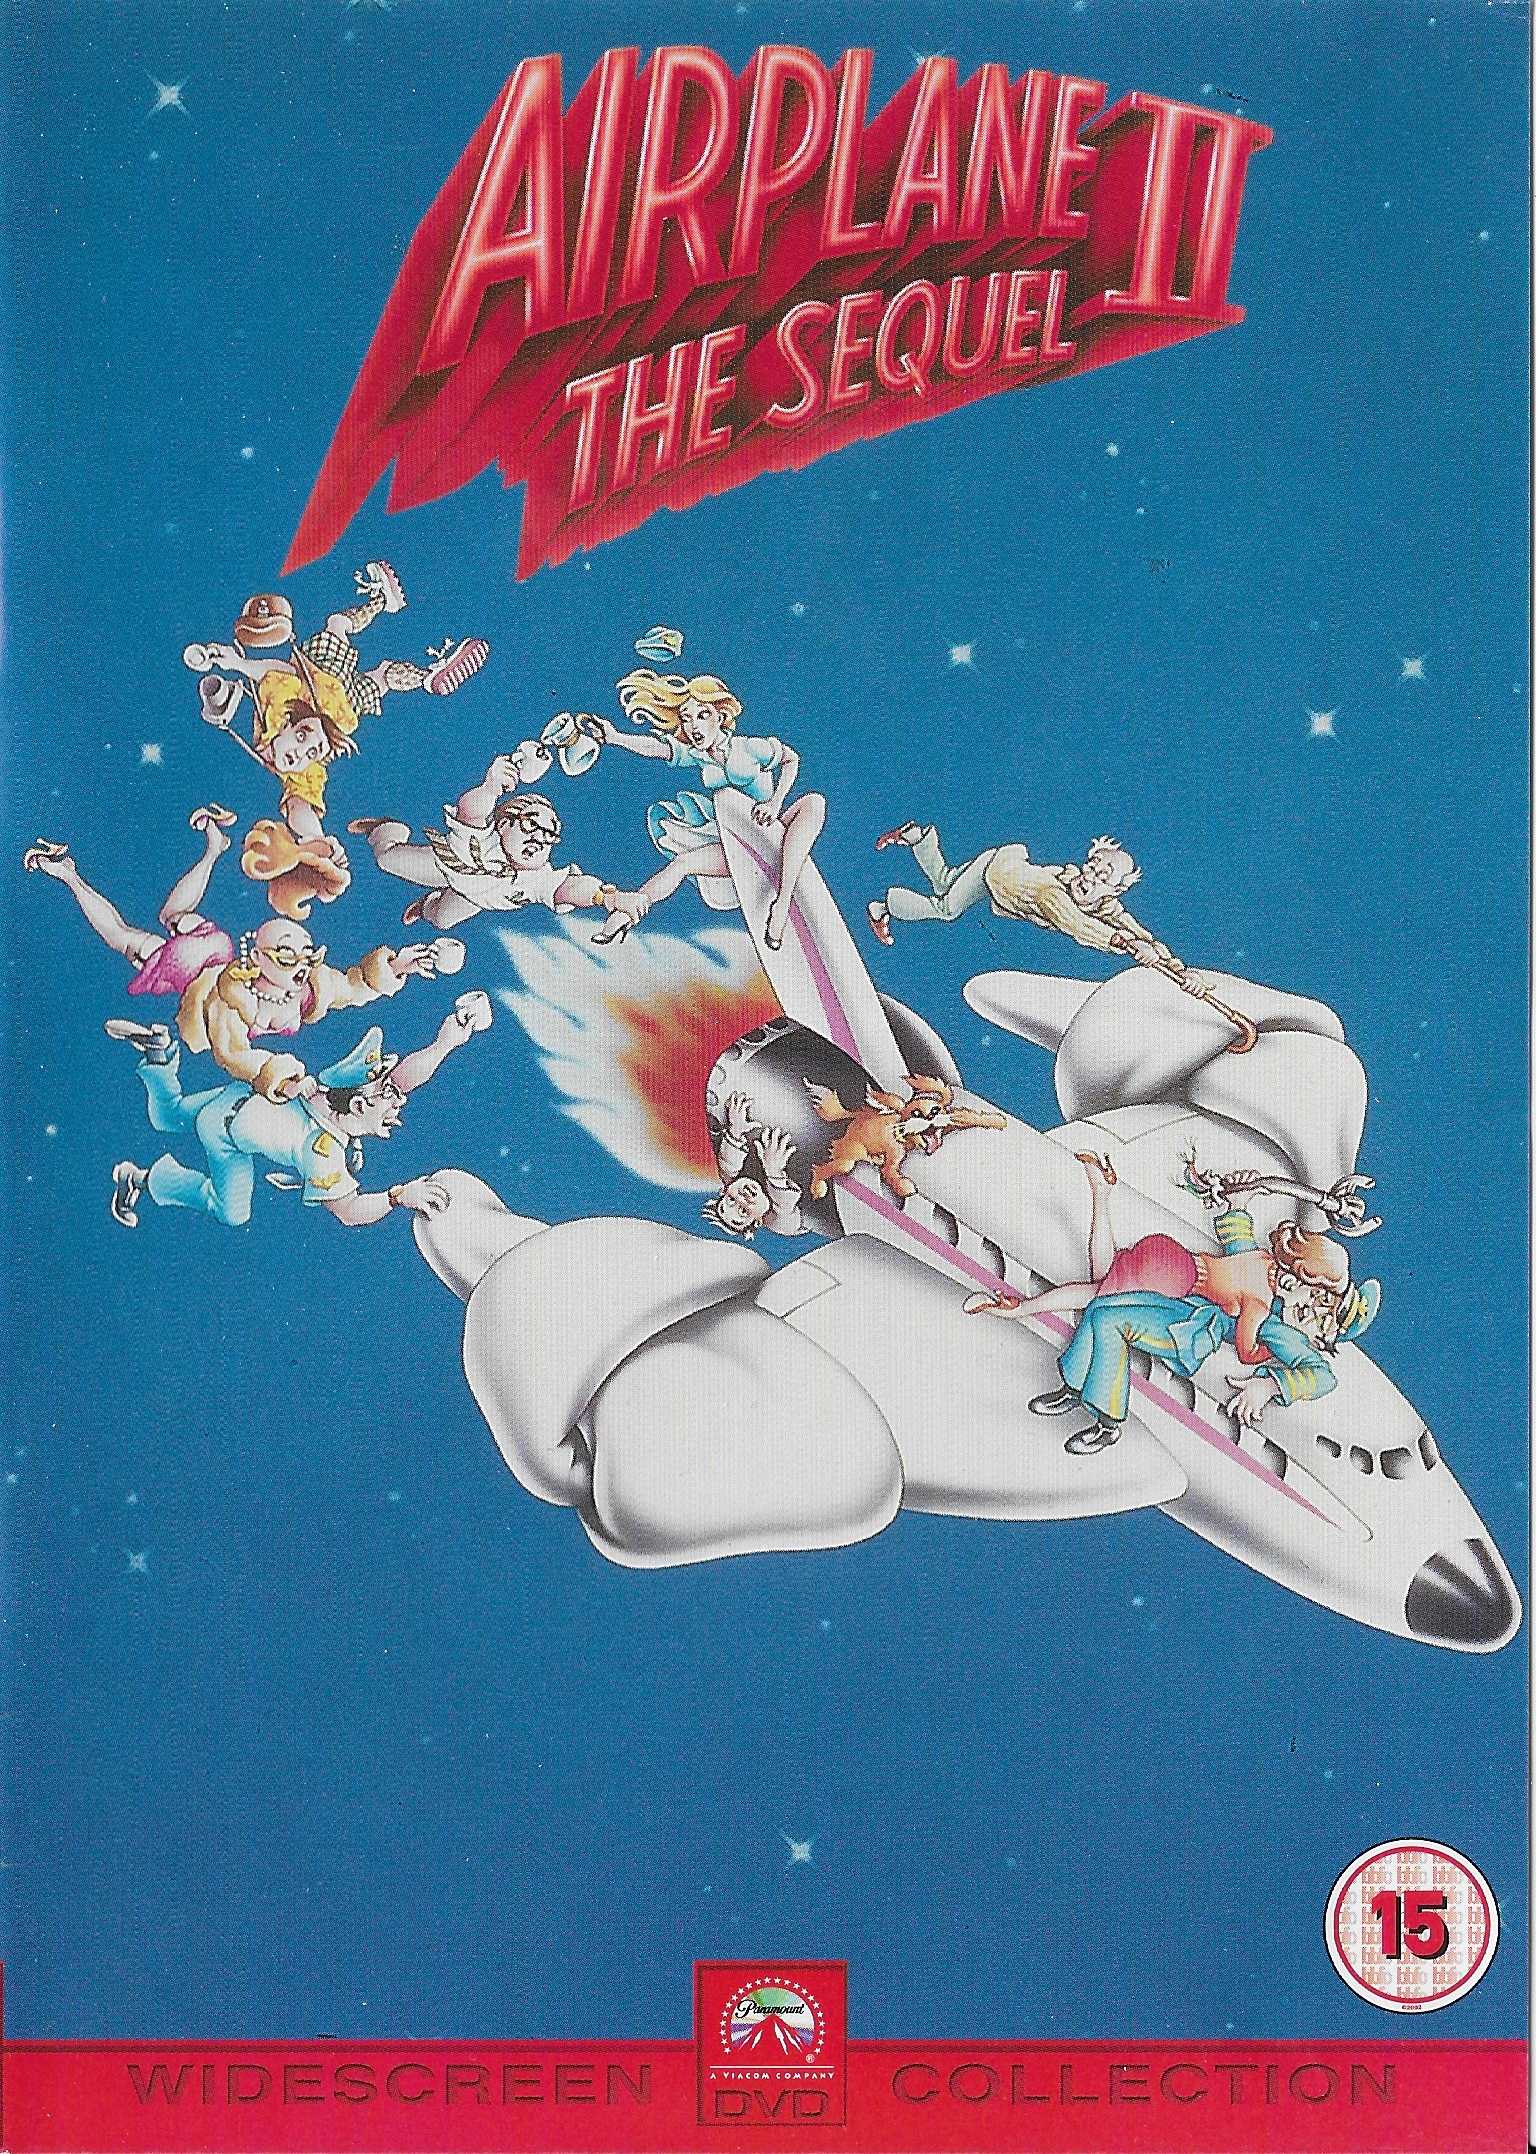 Picture of PHE 8047 Airplane II - The sequel by artist Ken Finkleman from ITV, Channel 4 and Channel 5 dvds library